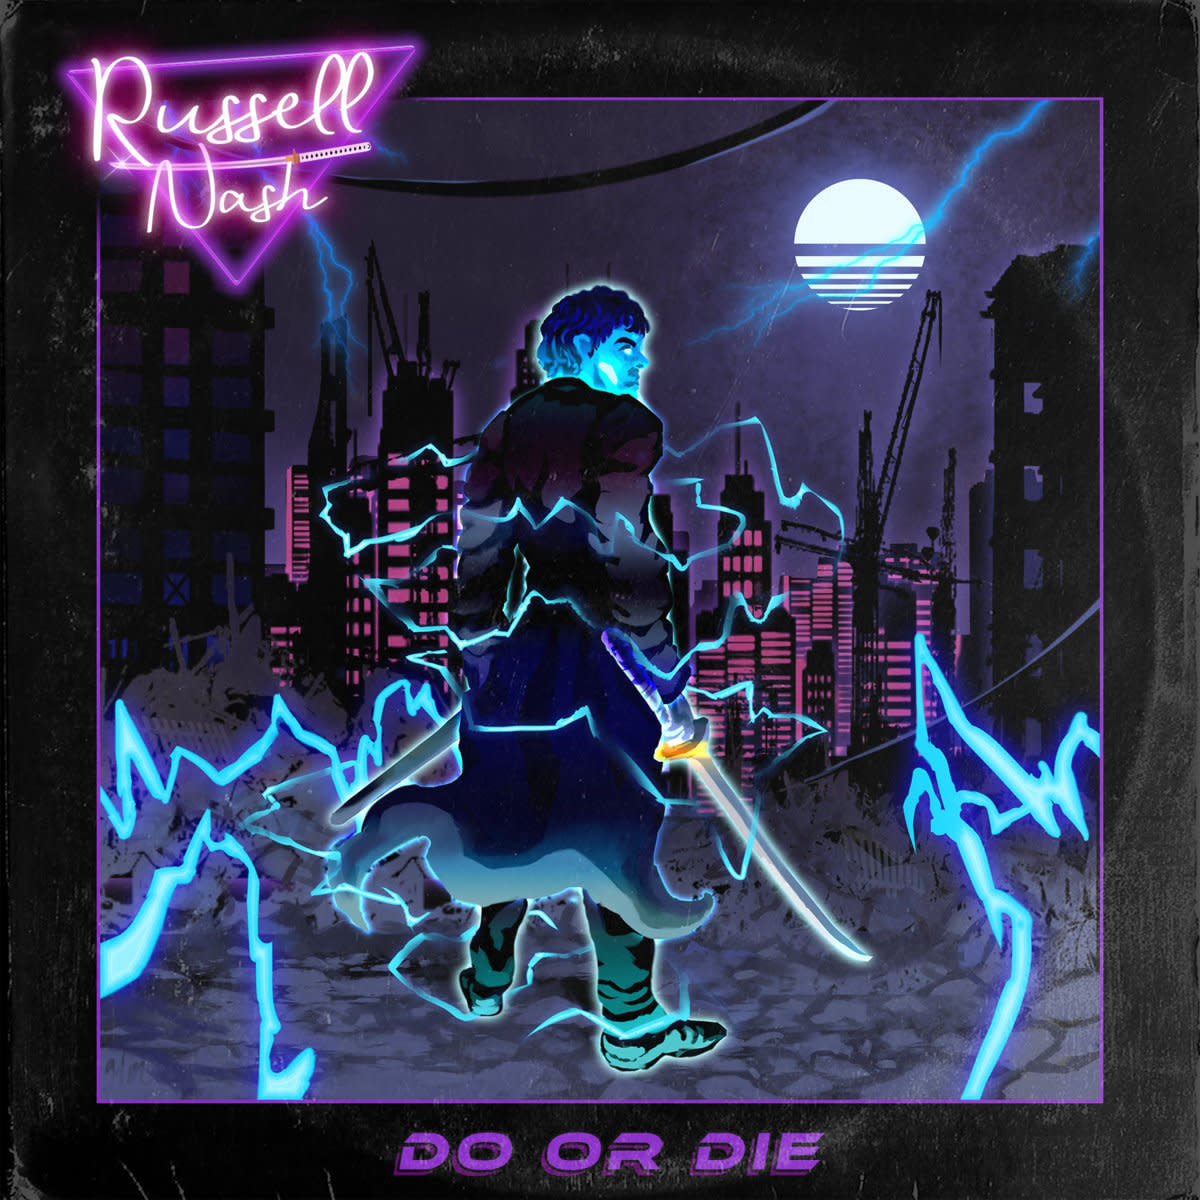 synth-album-review-do-or-die-by-russell-nash